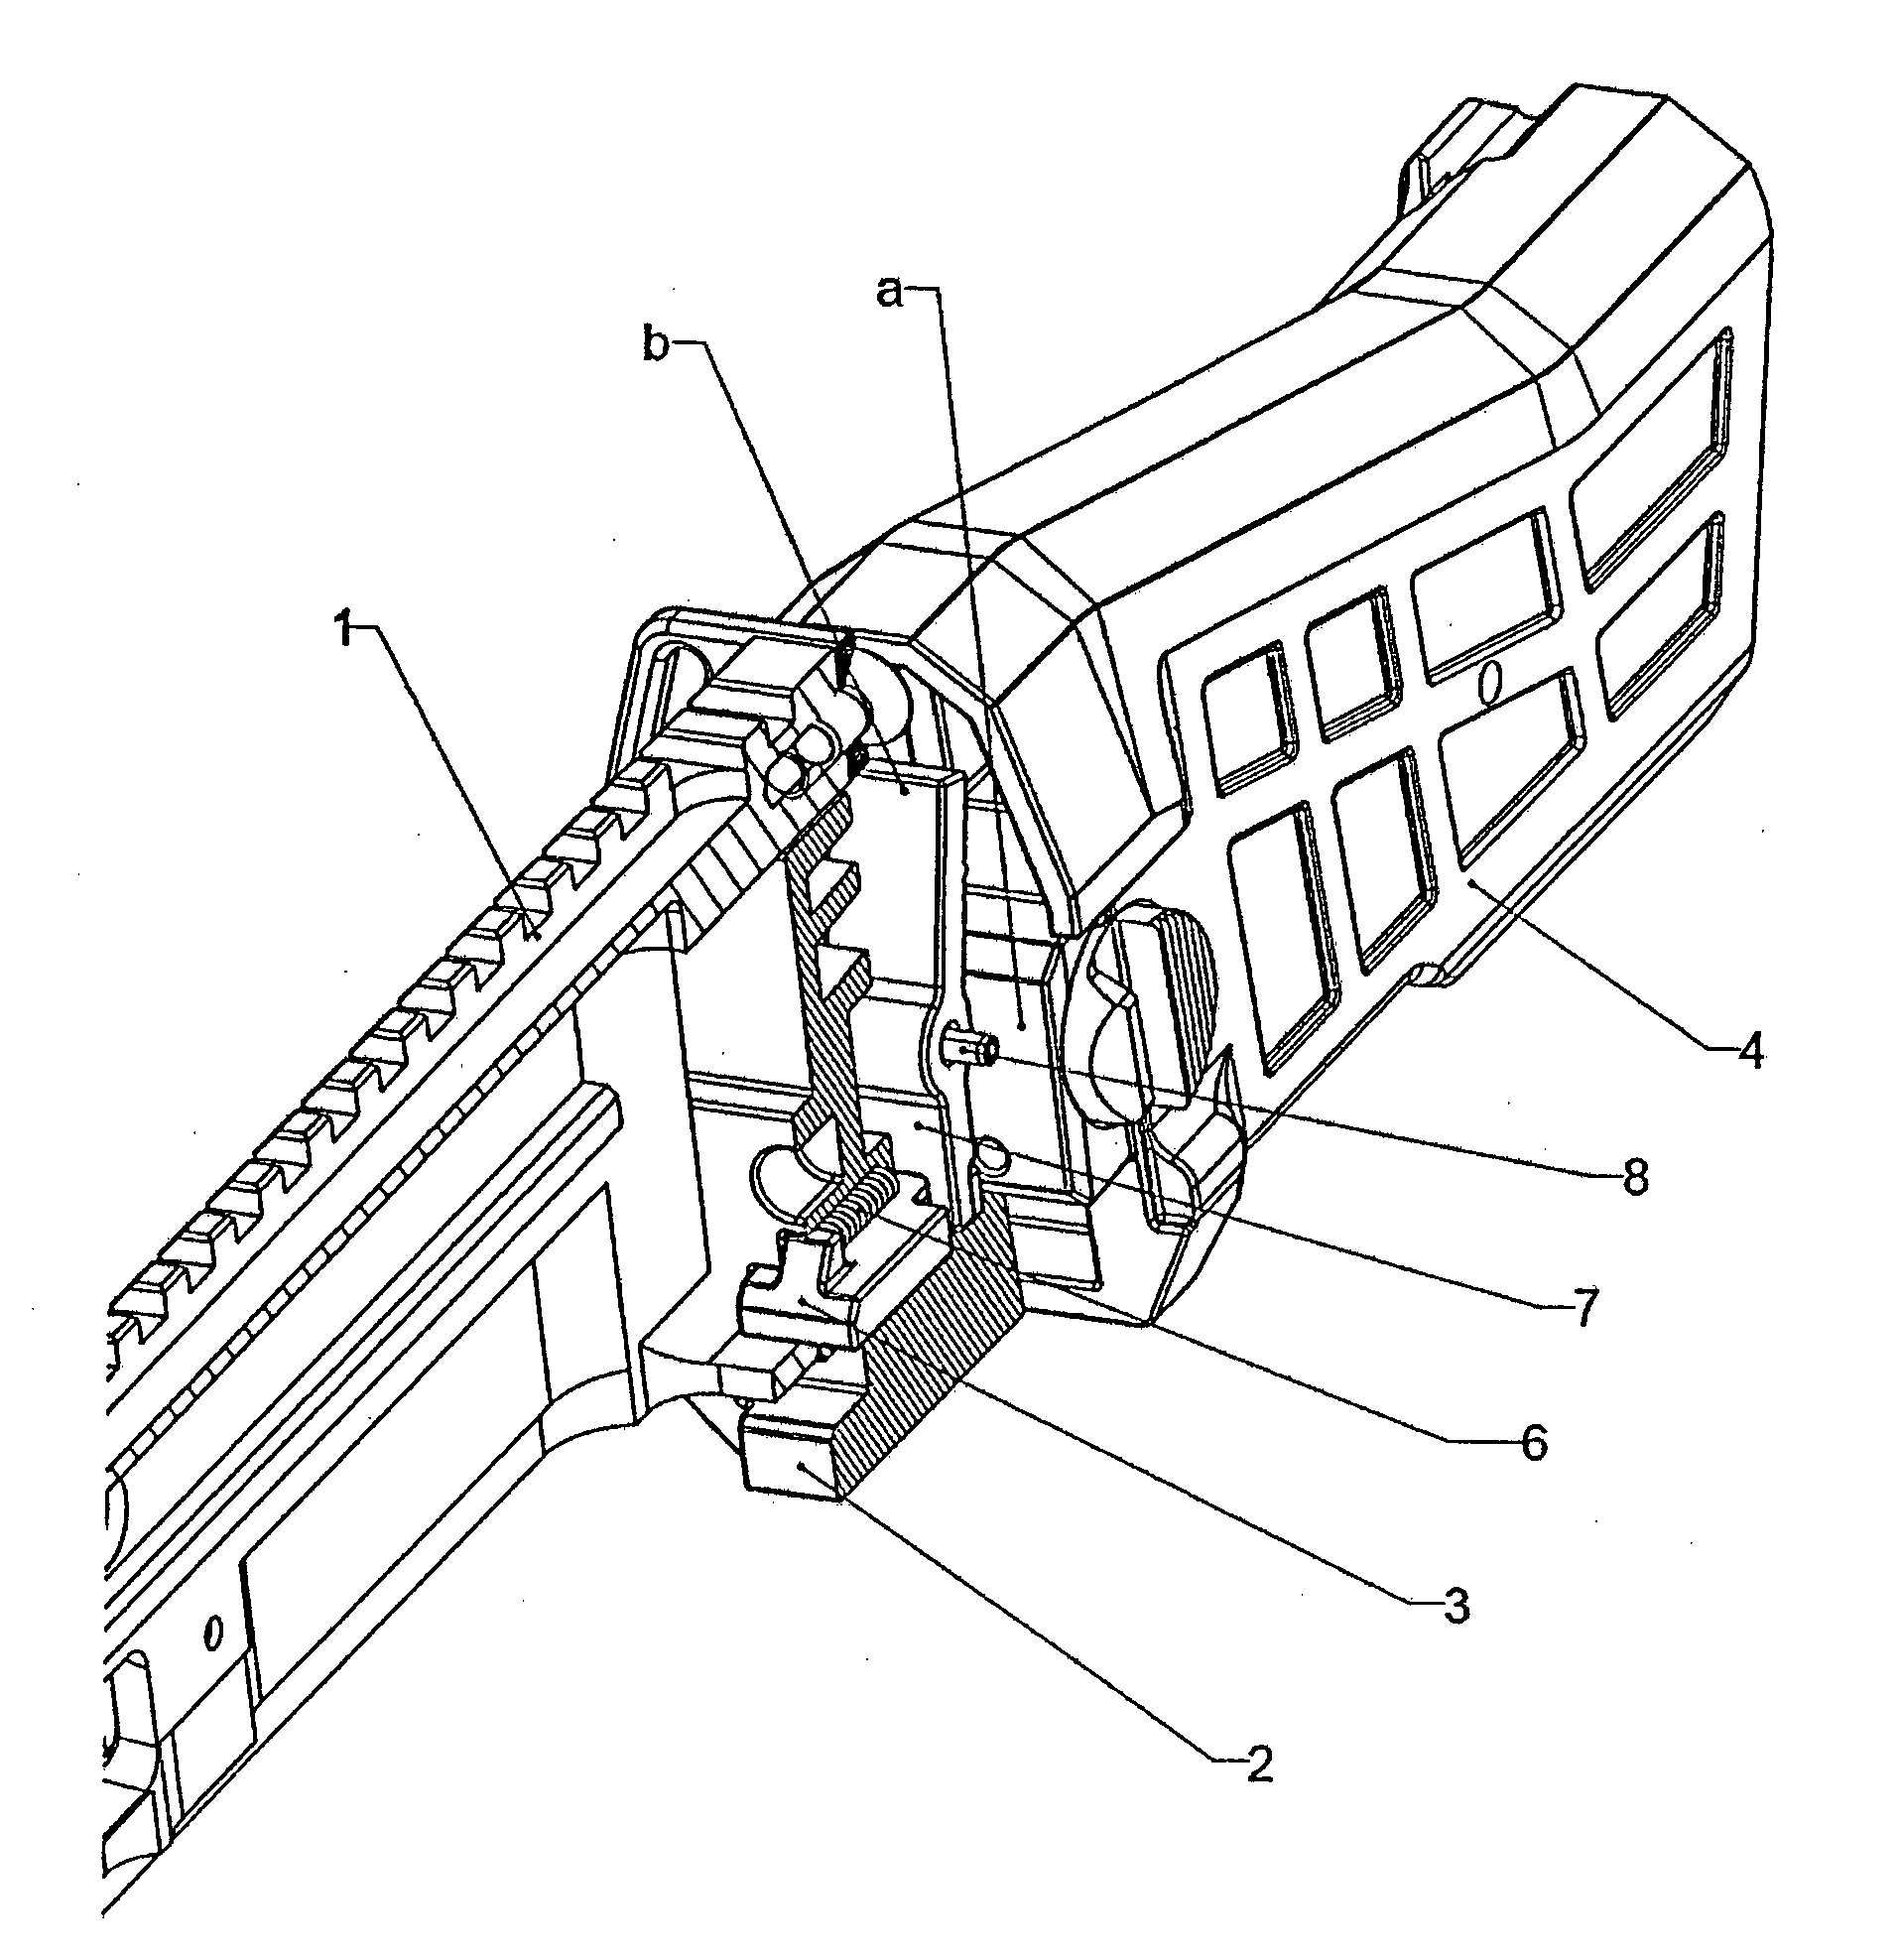 Connecting mechanism for connection of the firearm receiver and the shoulder mount